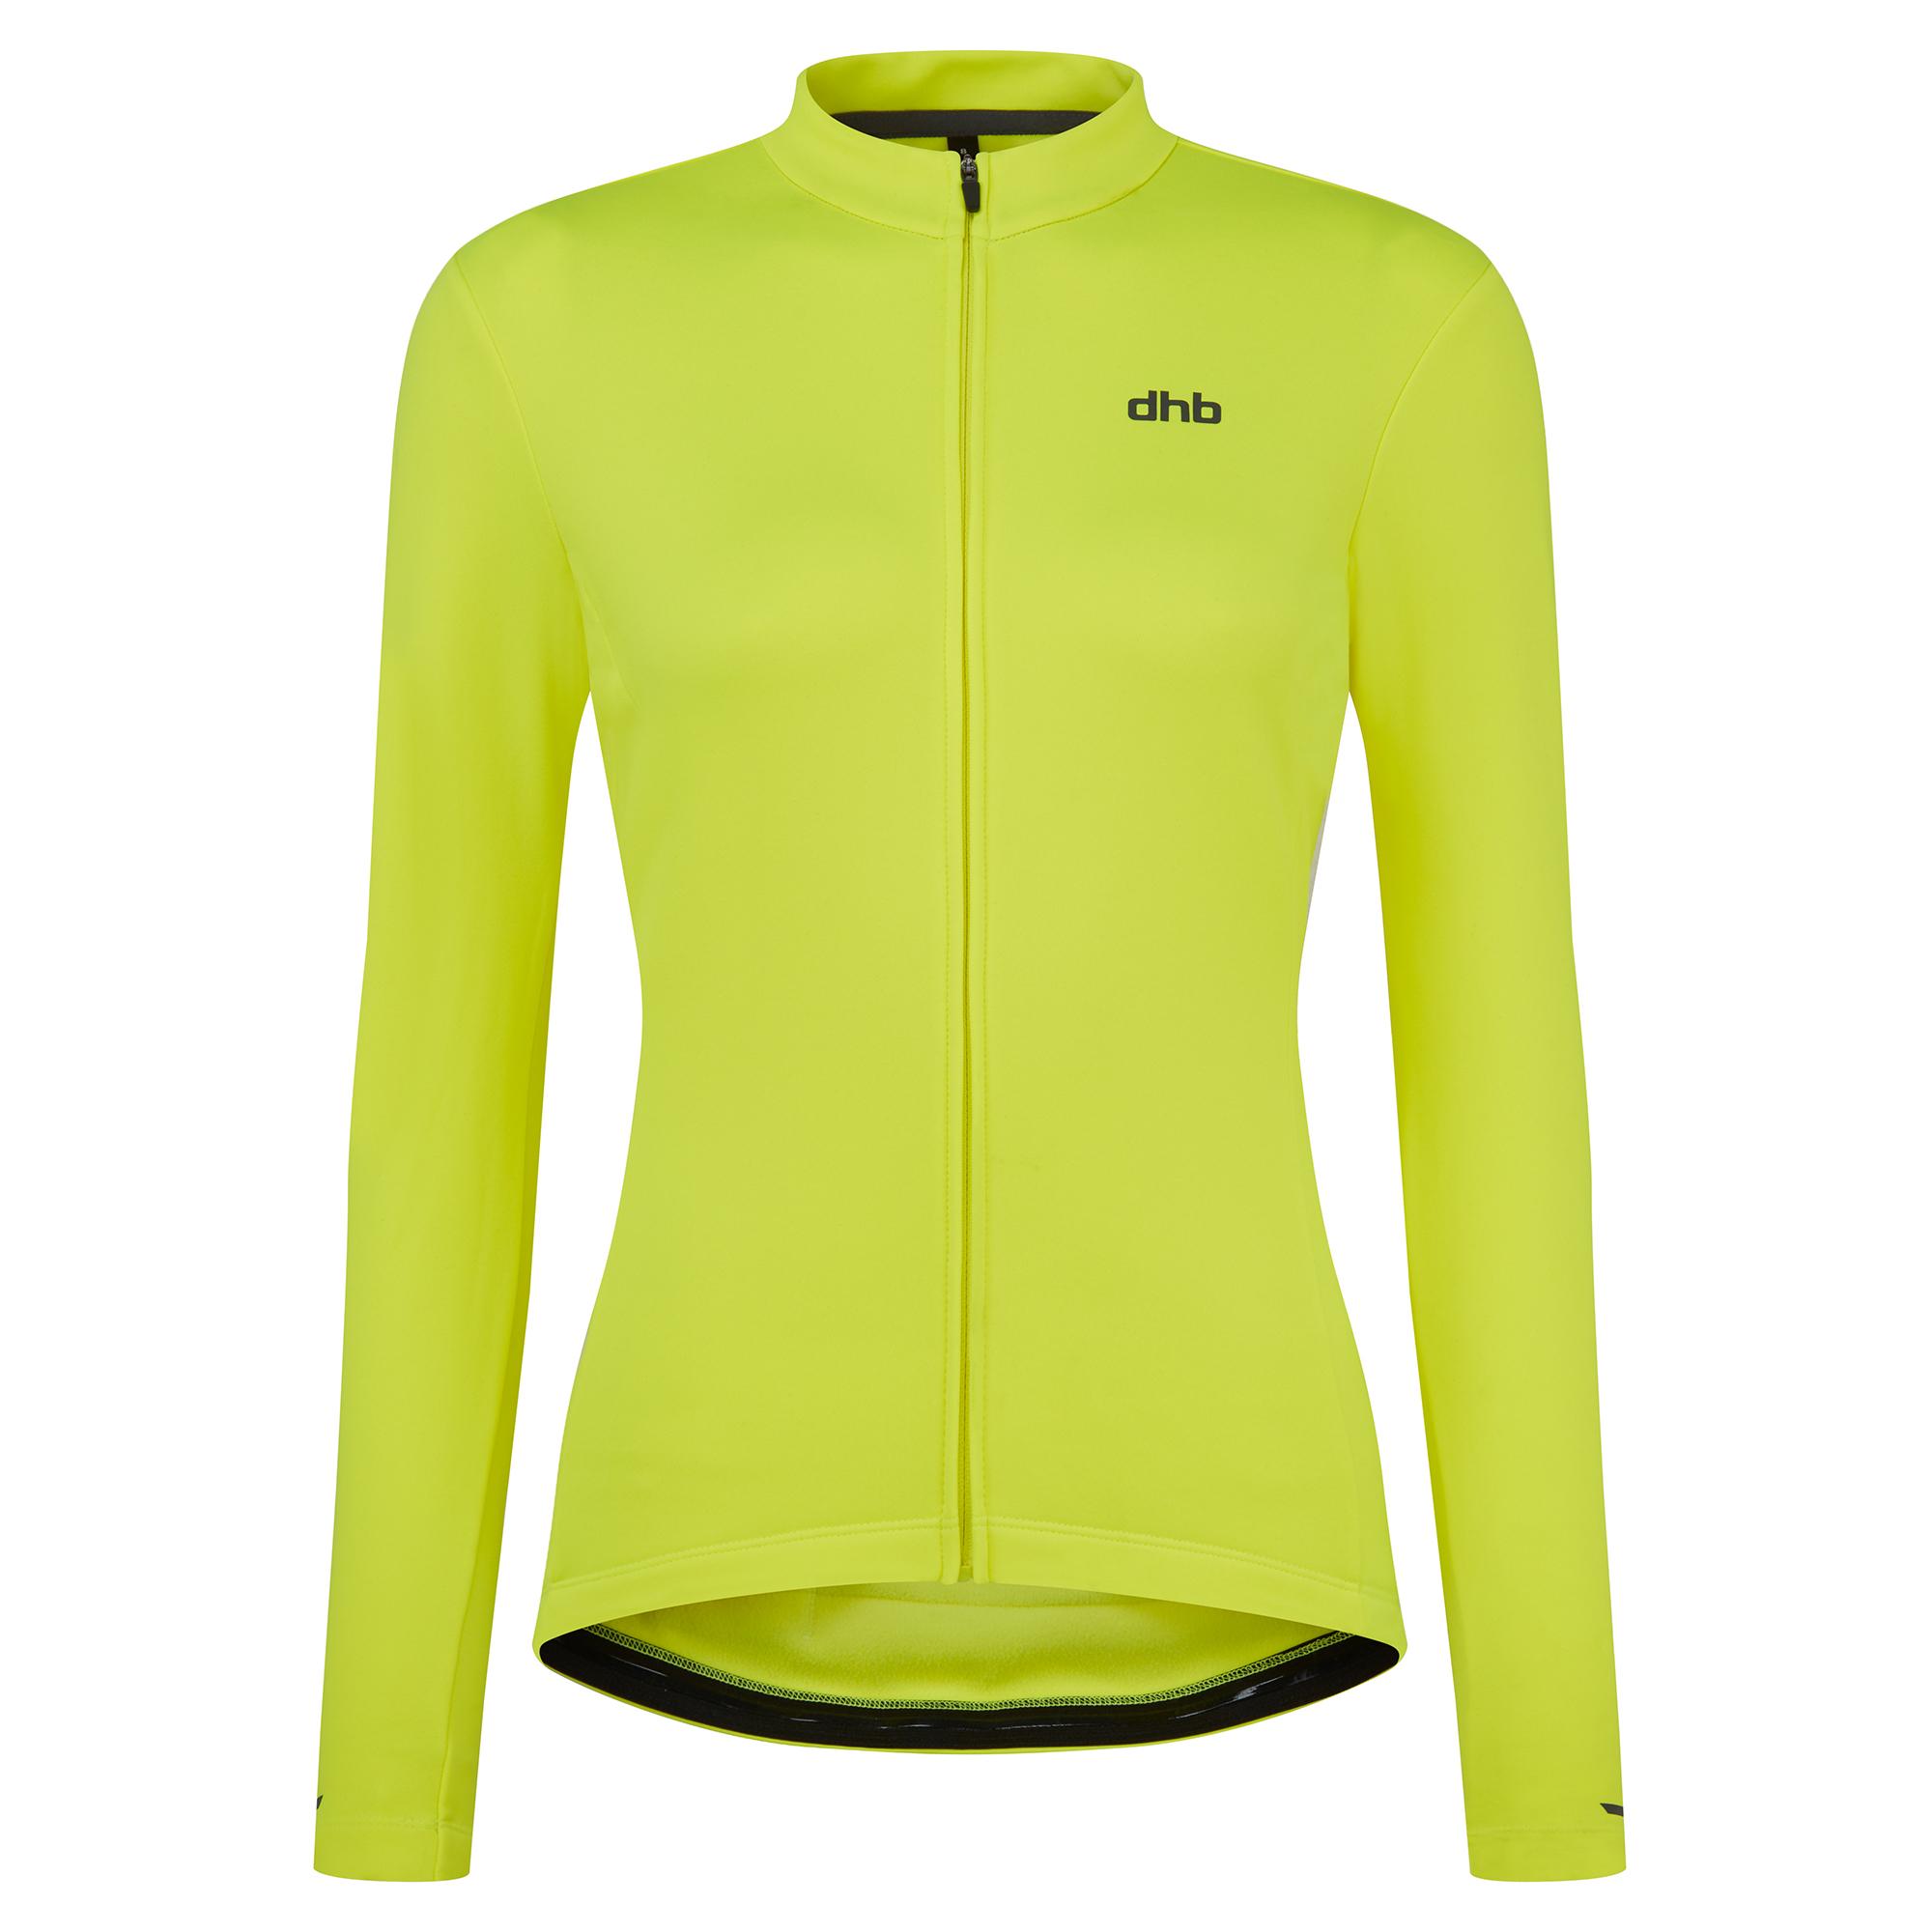 Dhb Womens Long Sleeve Thermal Cycling Jersey  Yellow Fluorescent